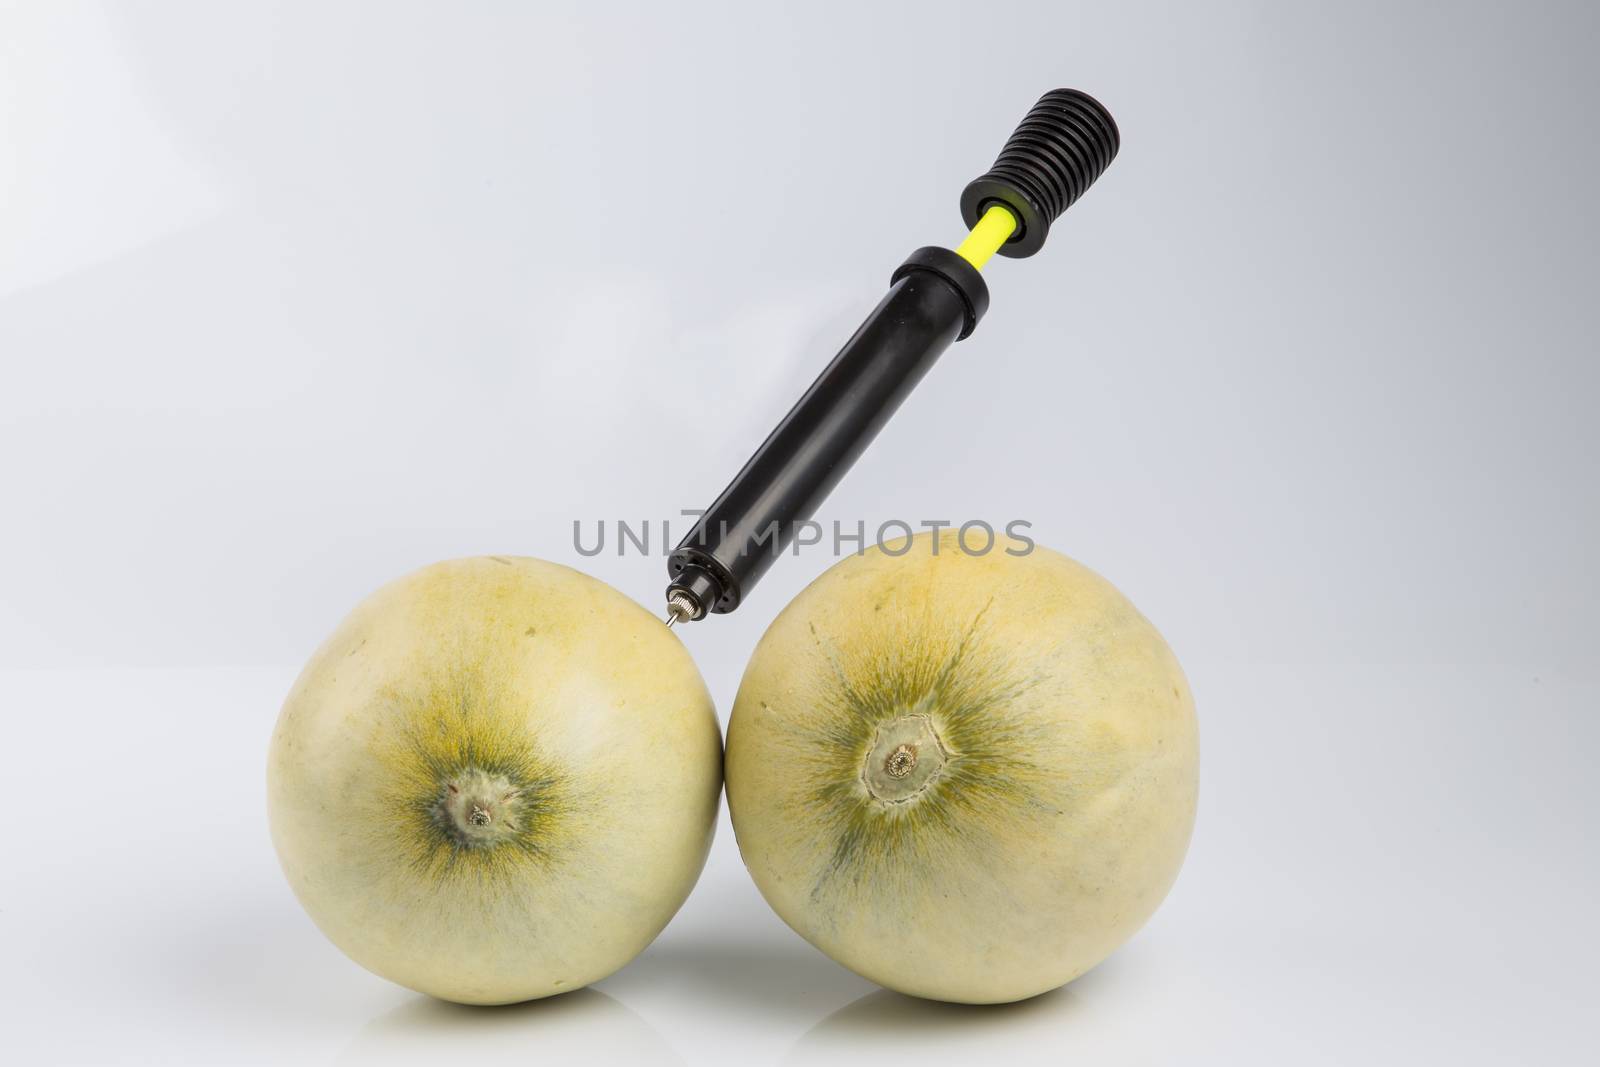 Cosmetic treatment  for Female breasts metaphor: melons air pumped  by bicycle pump meaning cosmetic and health treatment